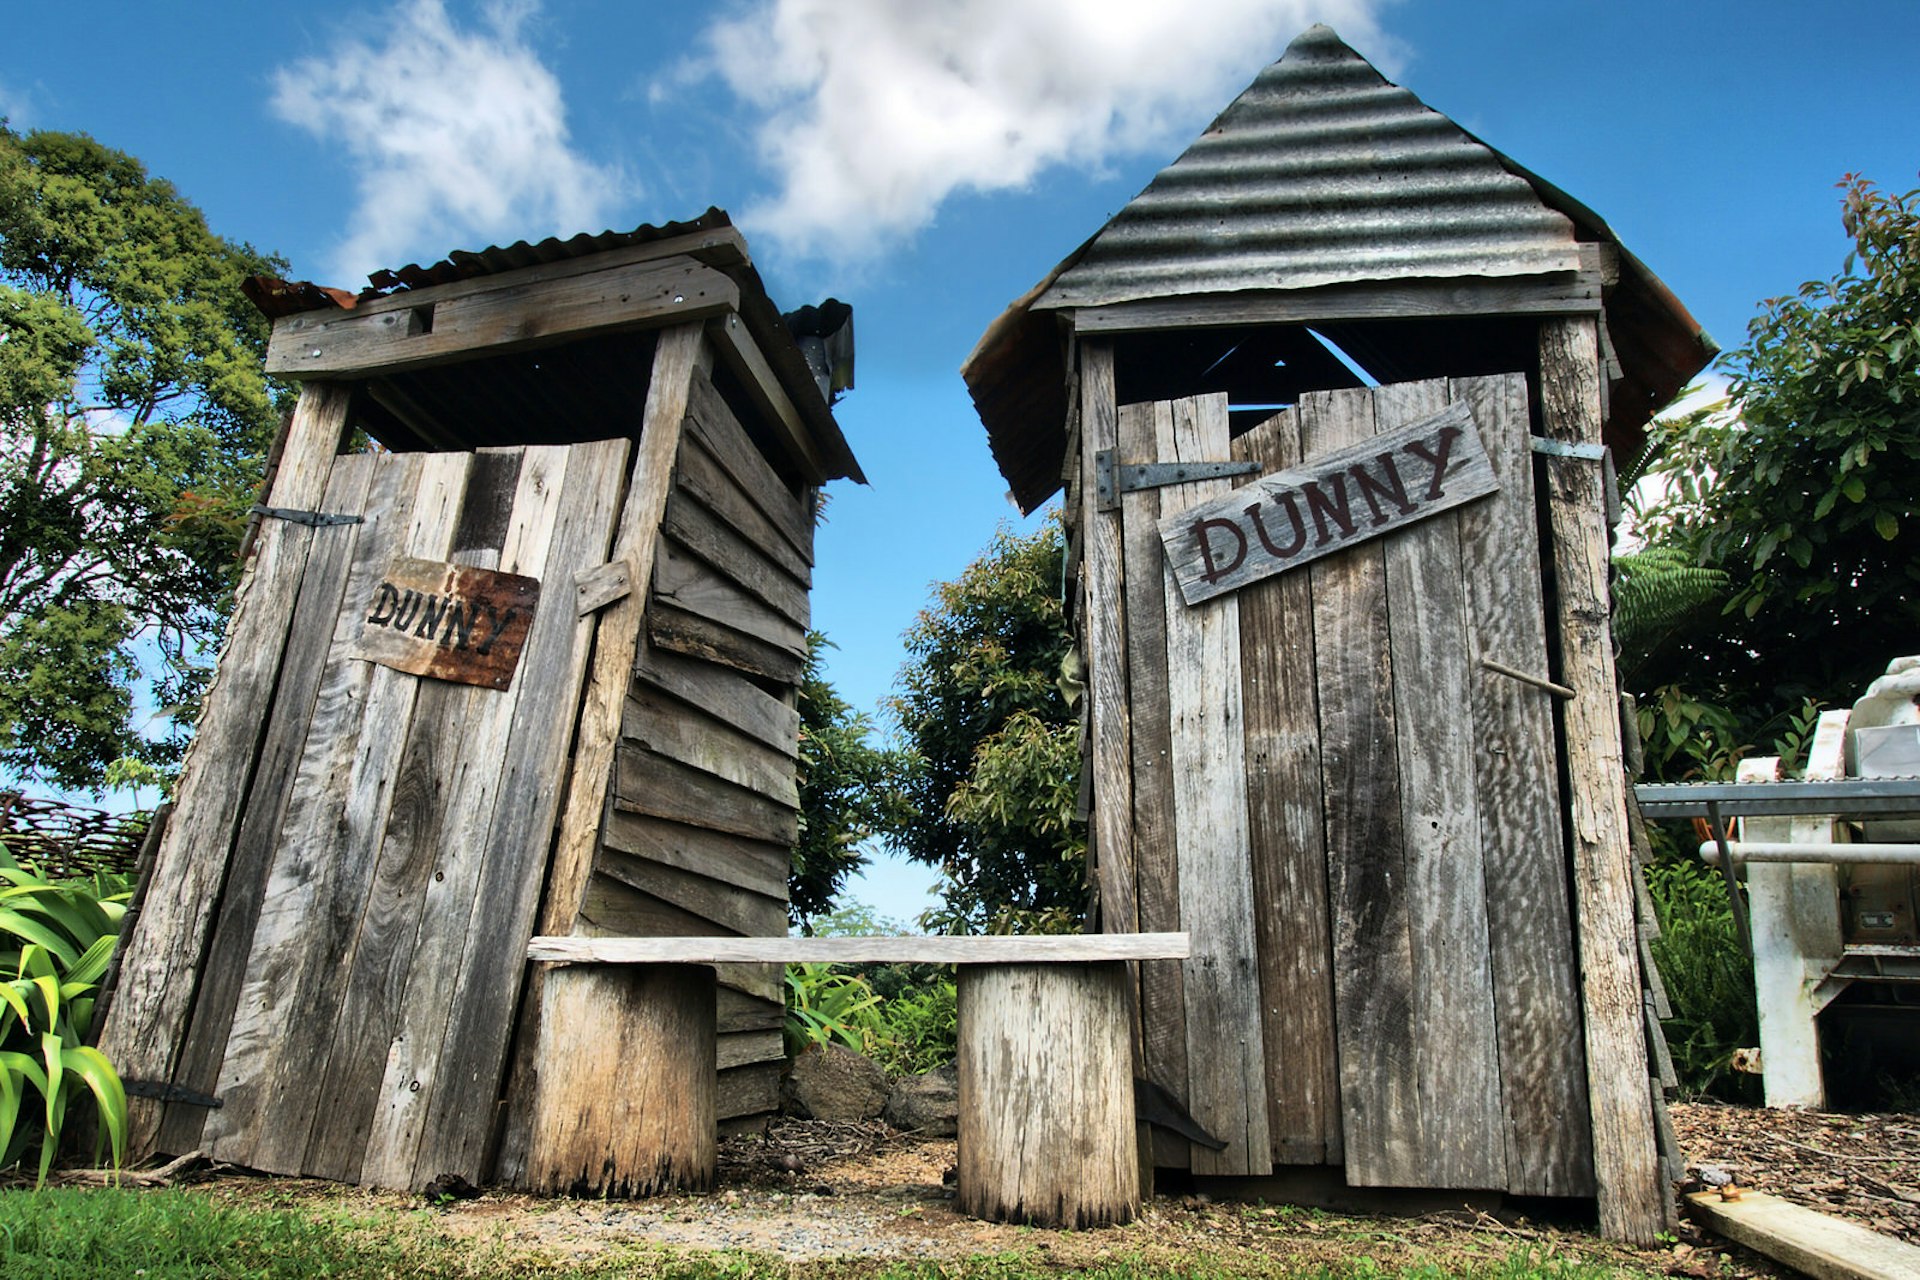 Two wooden outhouses © David Anderson / Getty Images